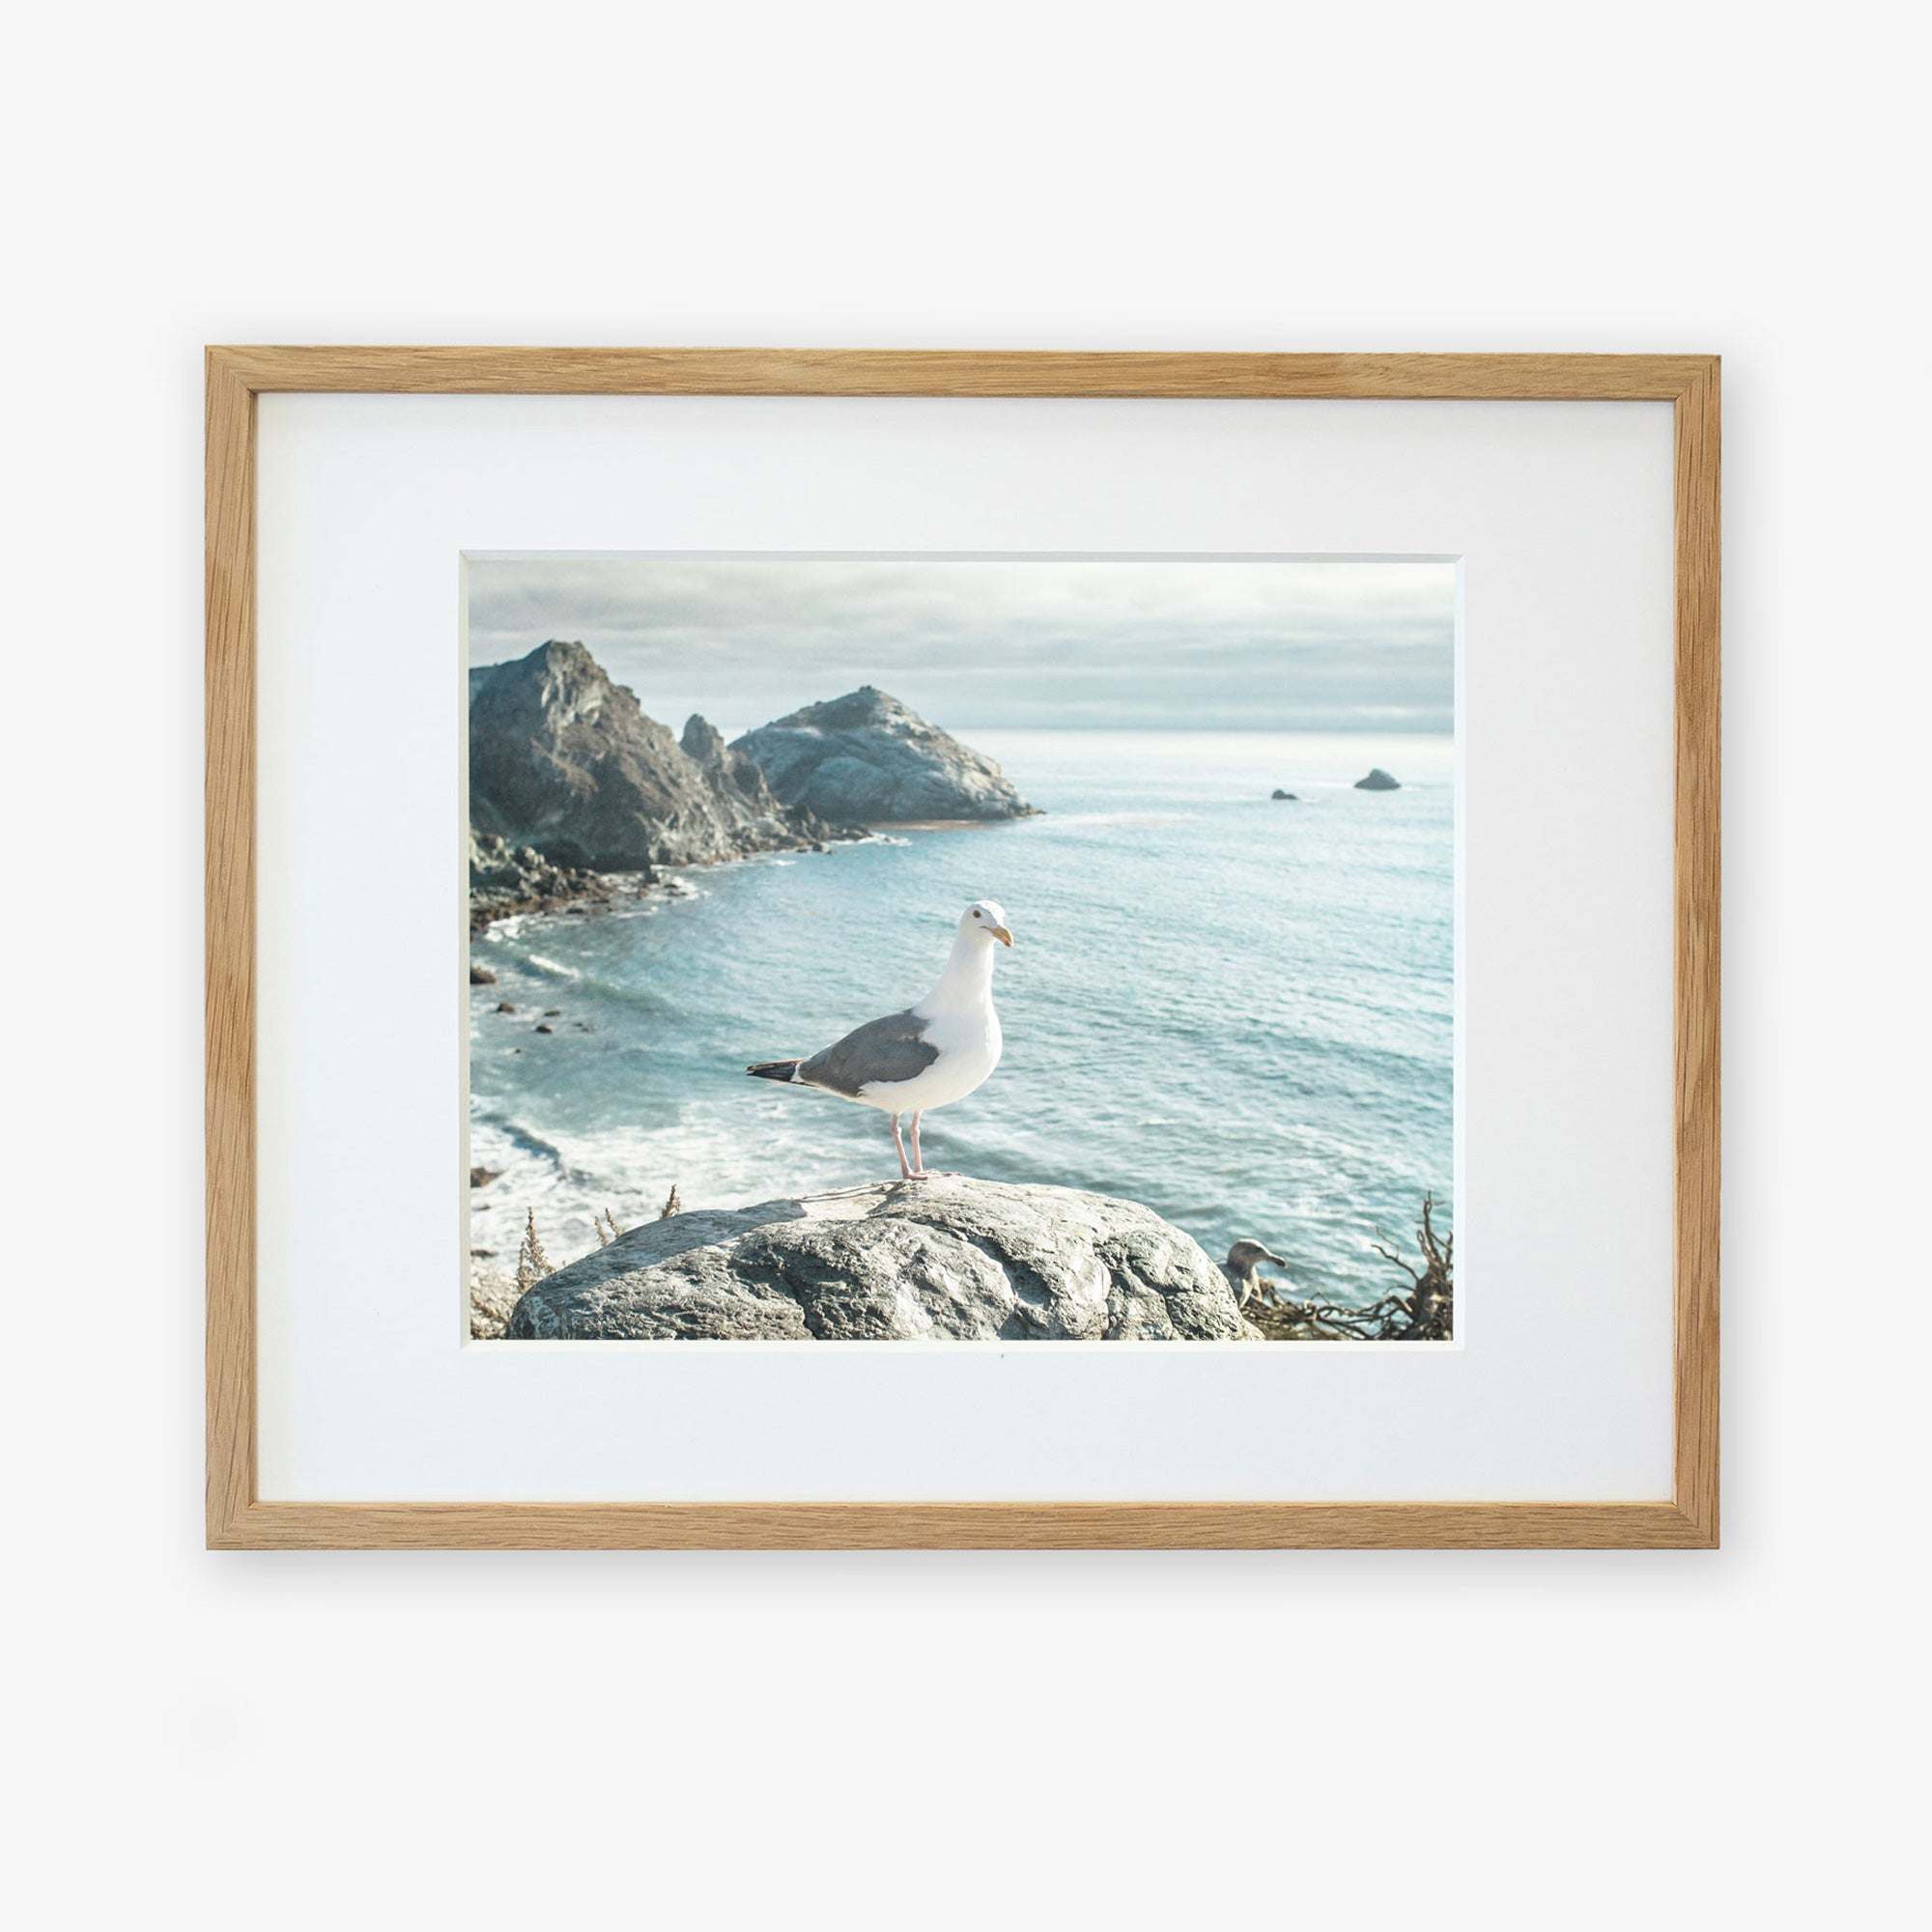 A framed photograph depicting a seagull standing on a rocky cliff with ocean waves and distant rocky islands in the background, printed on archival photographic paper and hung on a white wall - Offley Green&#39;s Big Sur Landscape Print, &#39;Lobster Mornay For Tea&#39;.